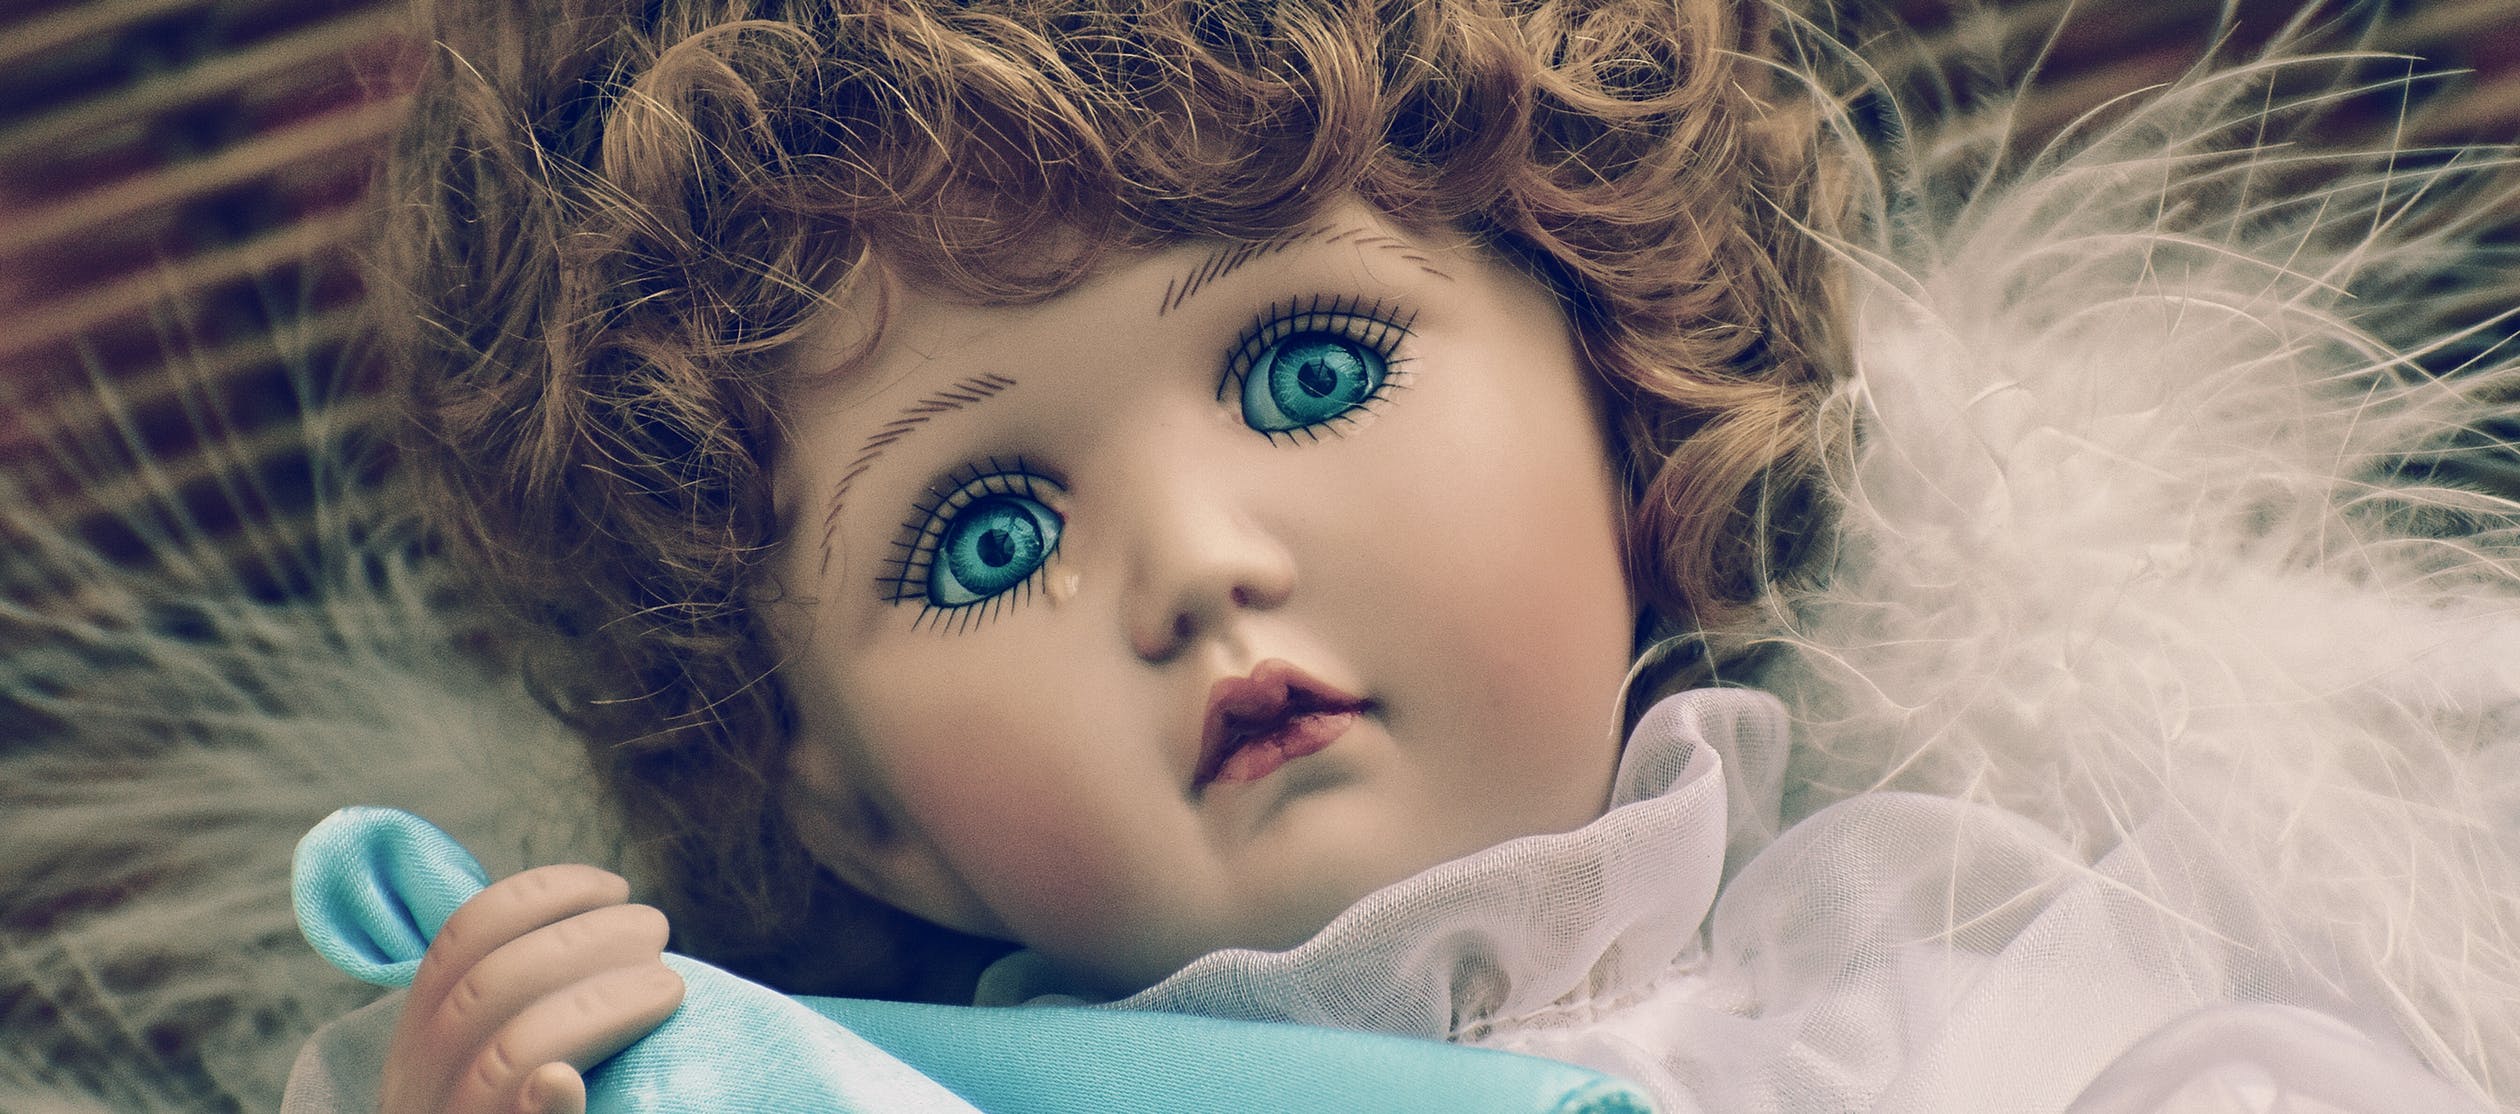 Sad Cute Beautiful Doll Crying Wallpaper For Free In HD 4K